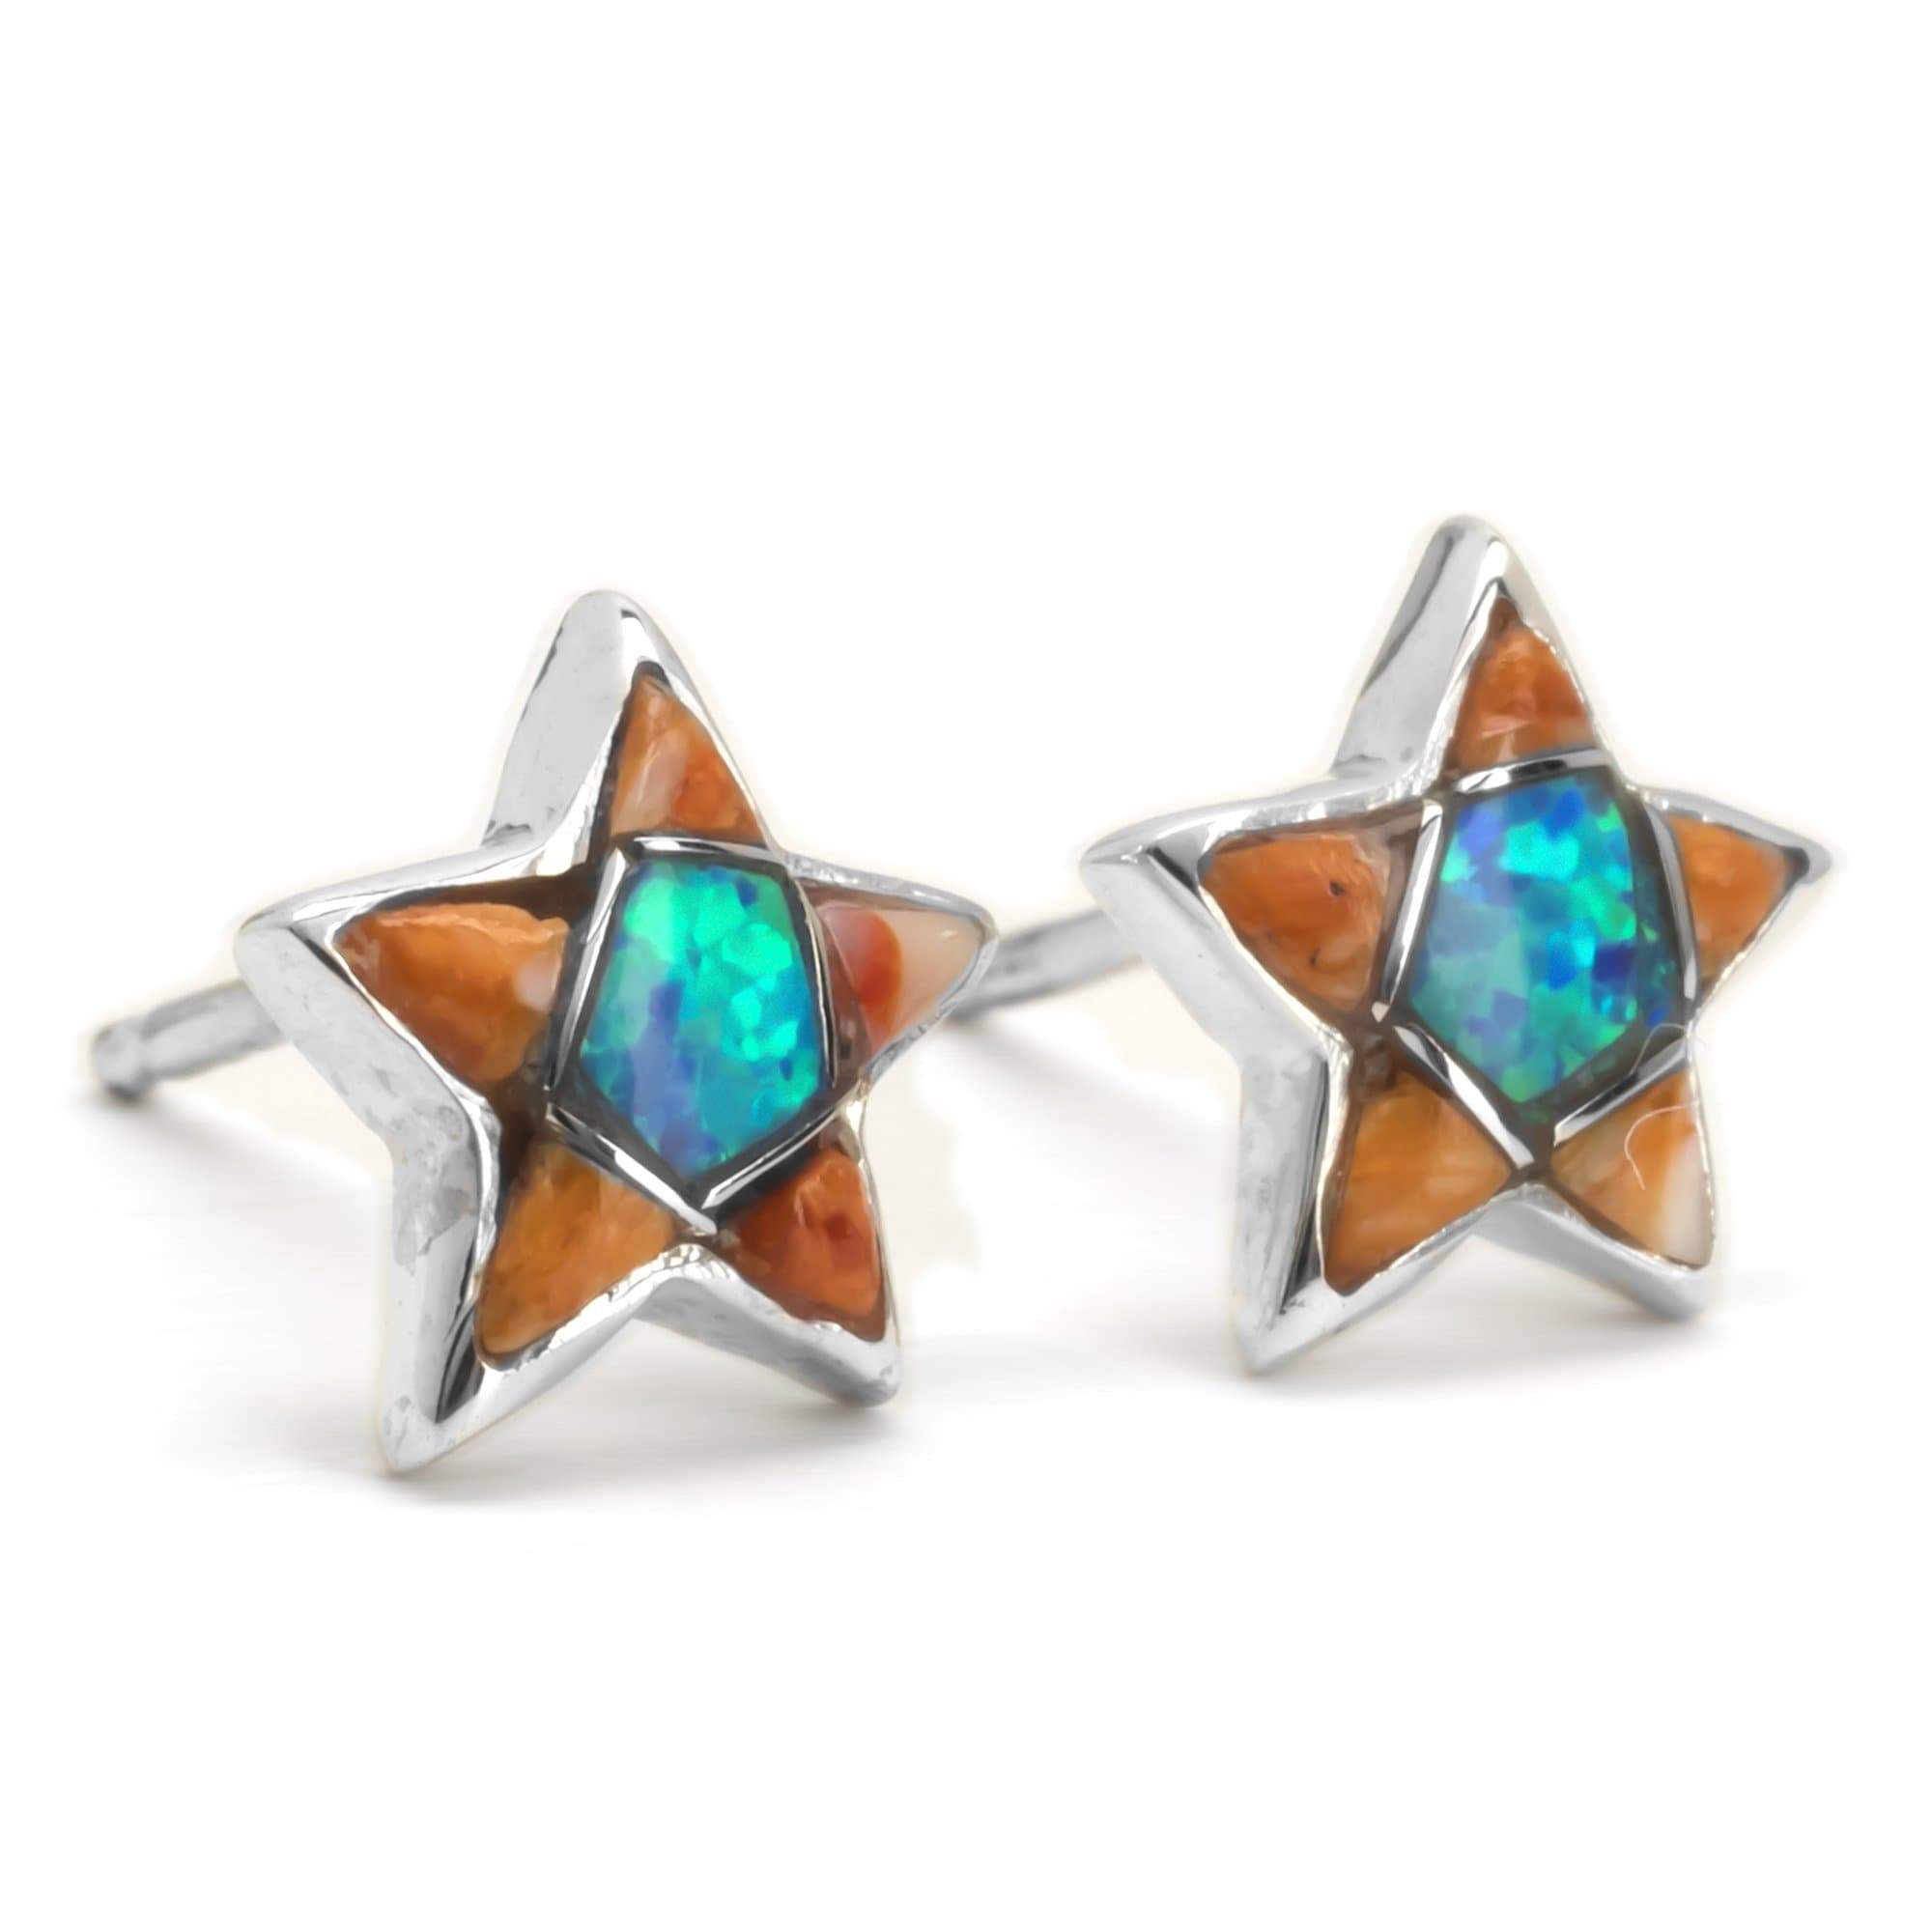 Kalifano Native American Jewelry Spiny Oyster Shell Star 925 Sterling Silver Earring with Stud Backing USA USA Handmade with Opal Accent NME.2243.SP